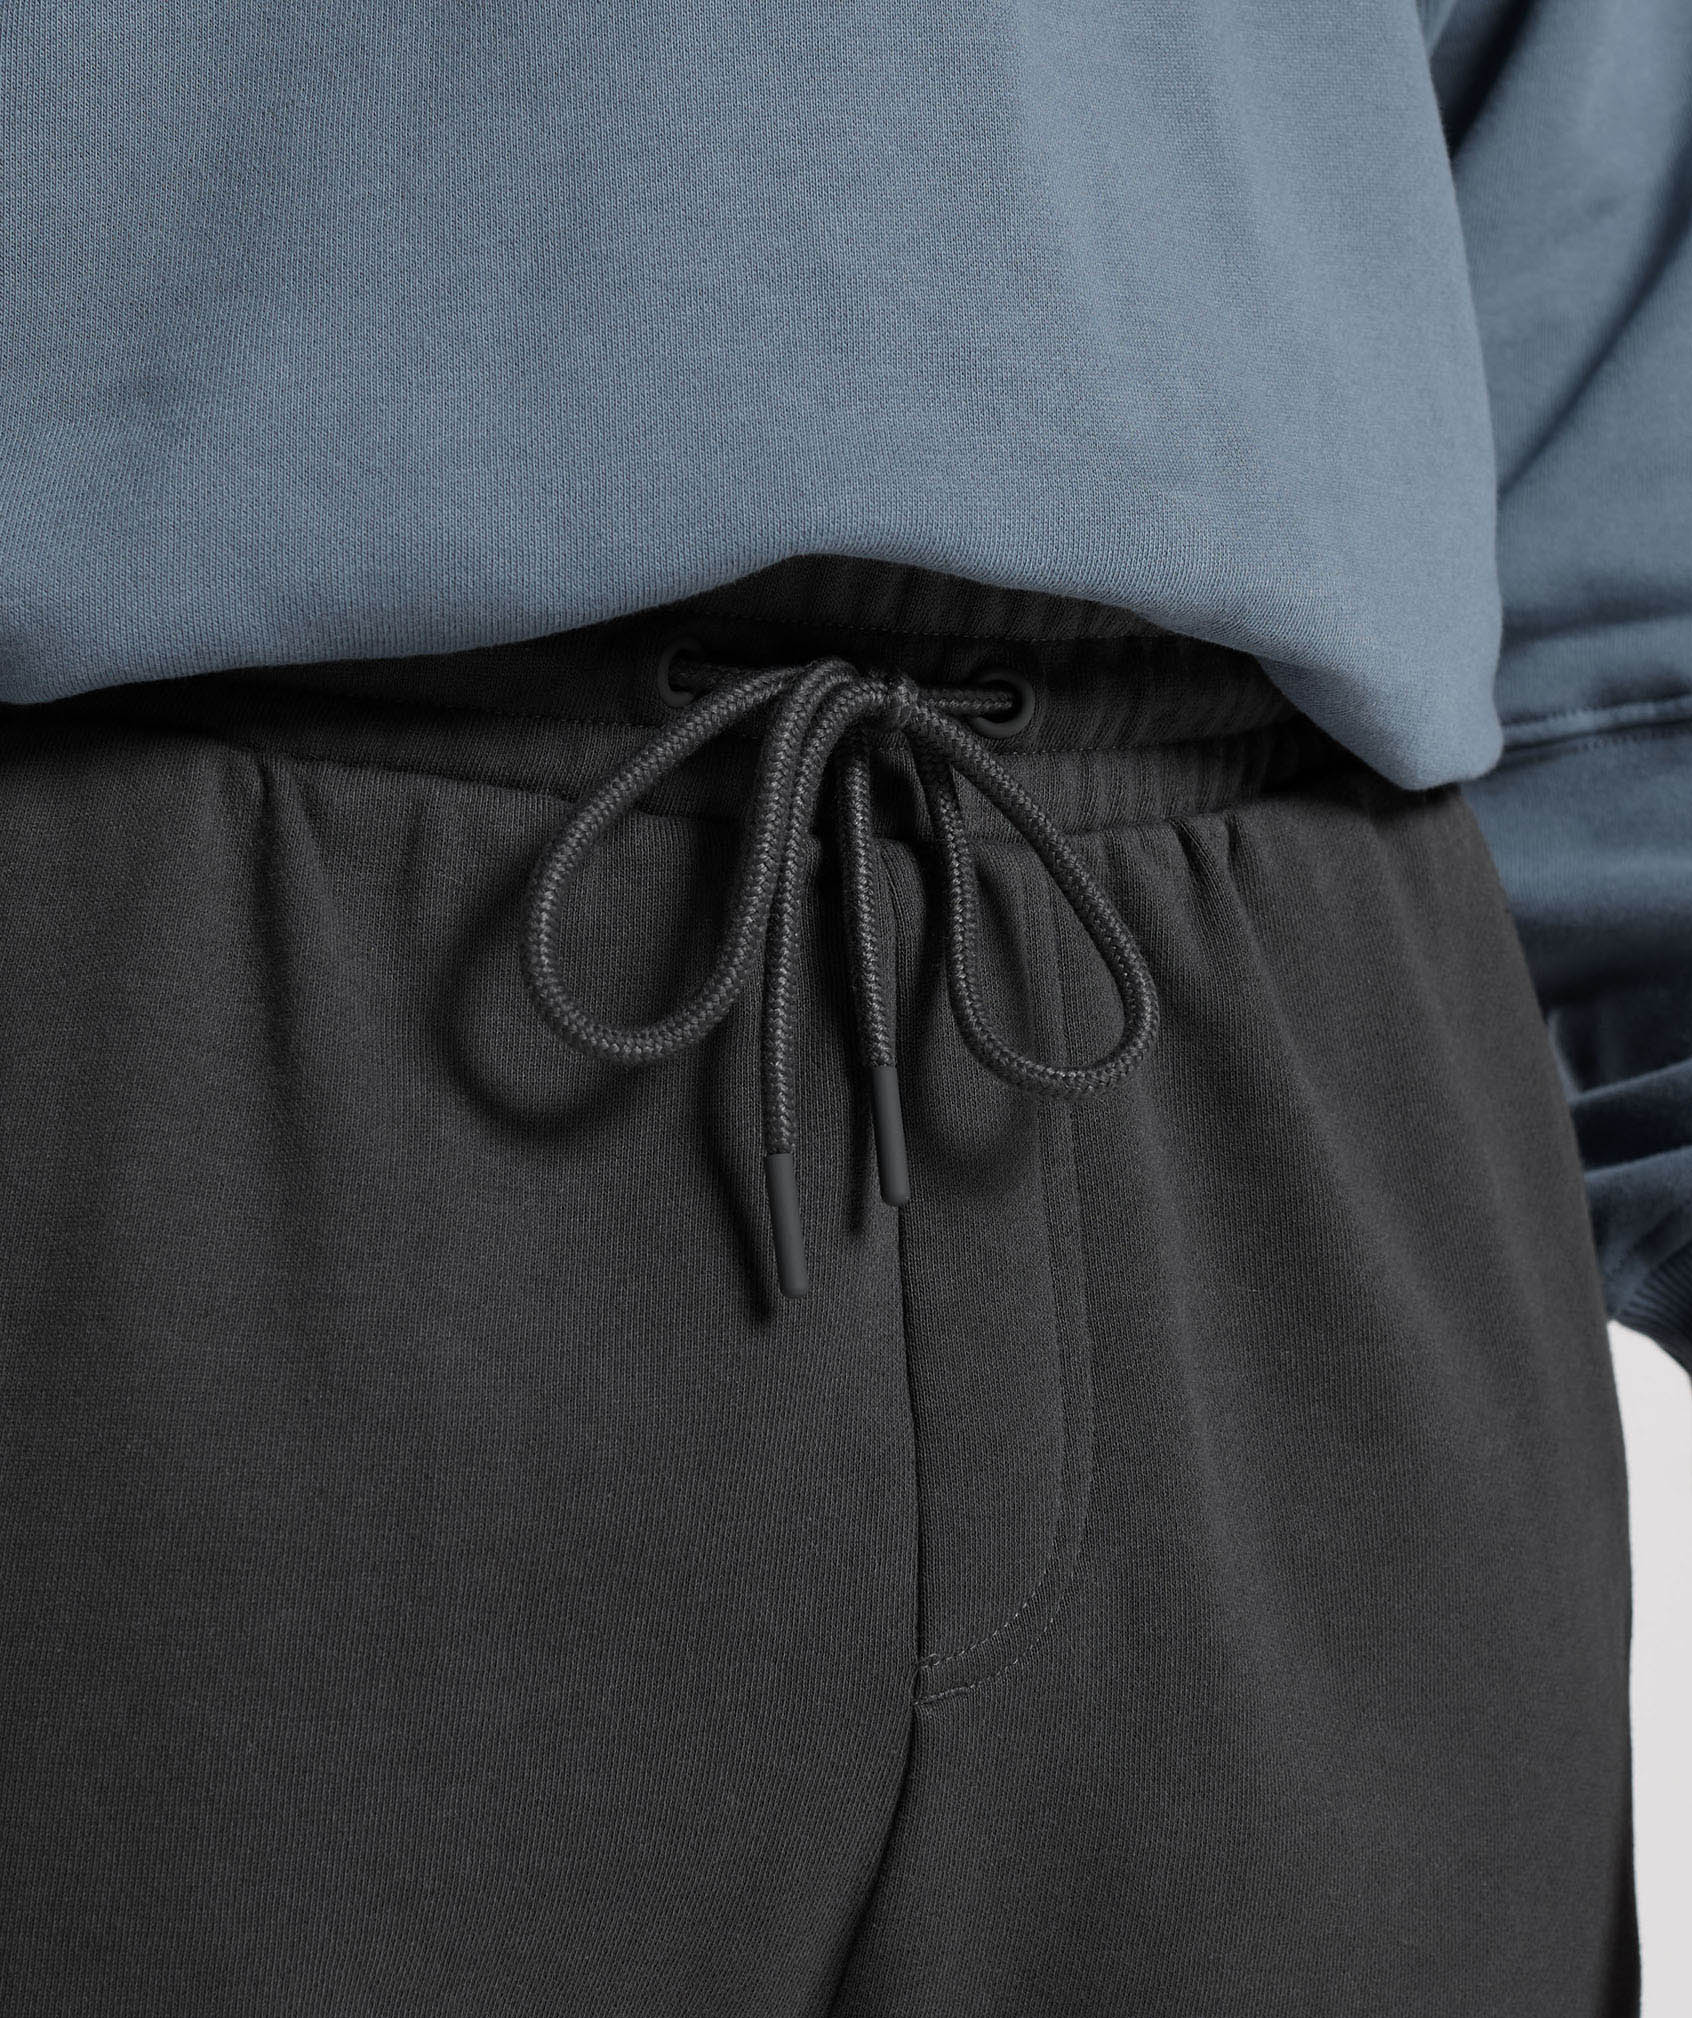 Rest Day Essentials 7" Shorts in Onyx Grey - view 6